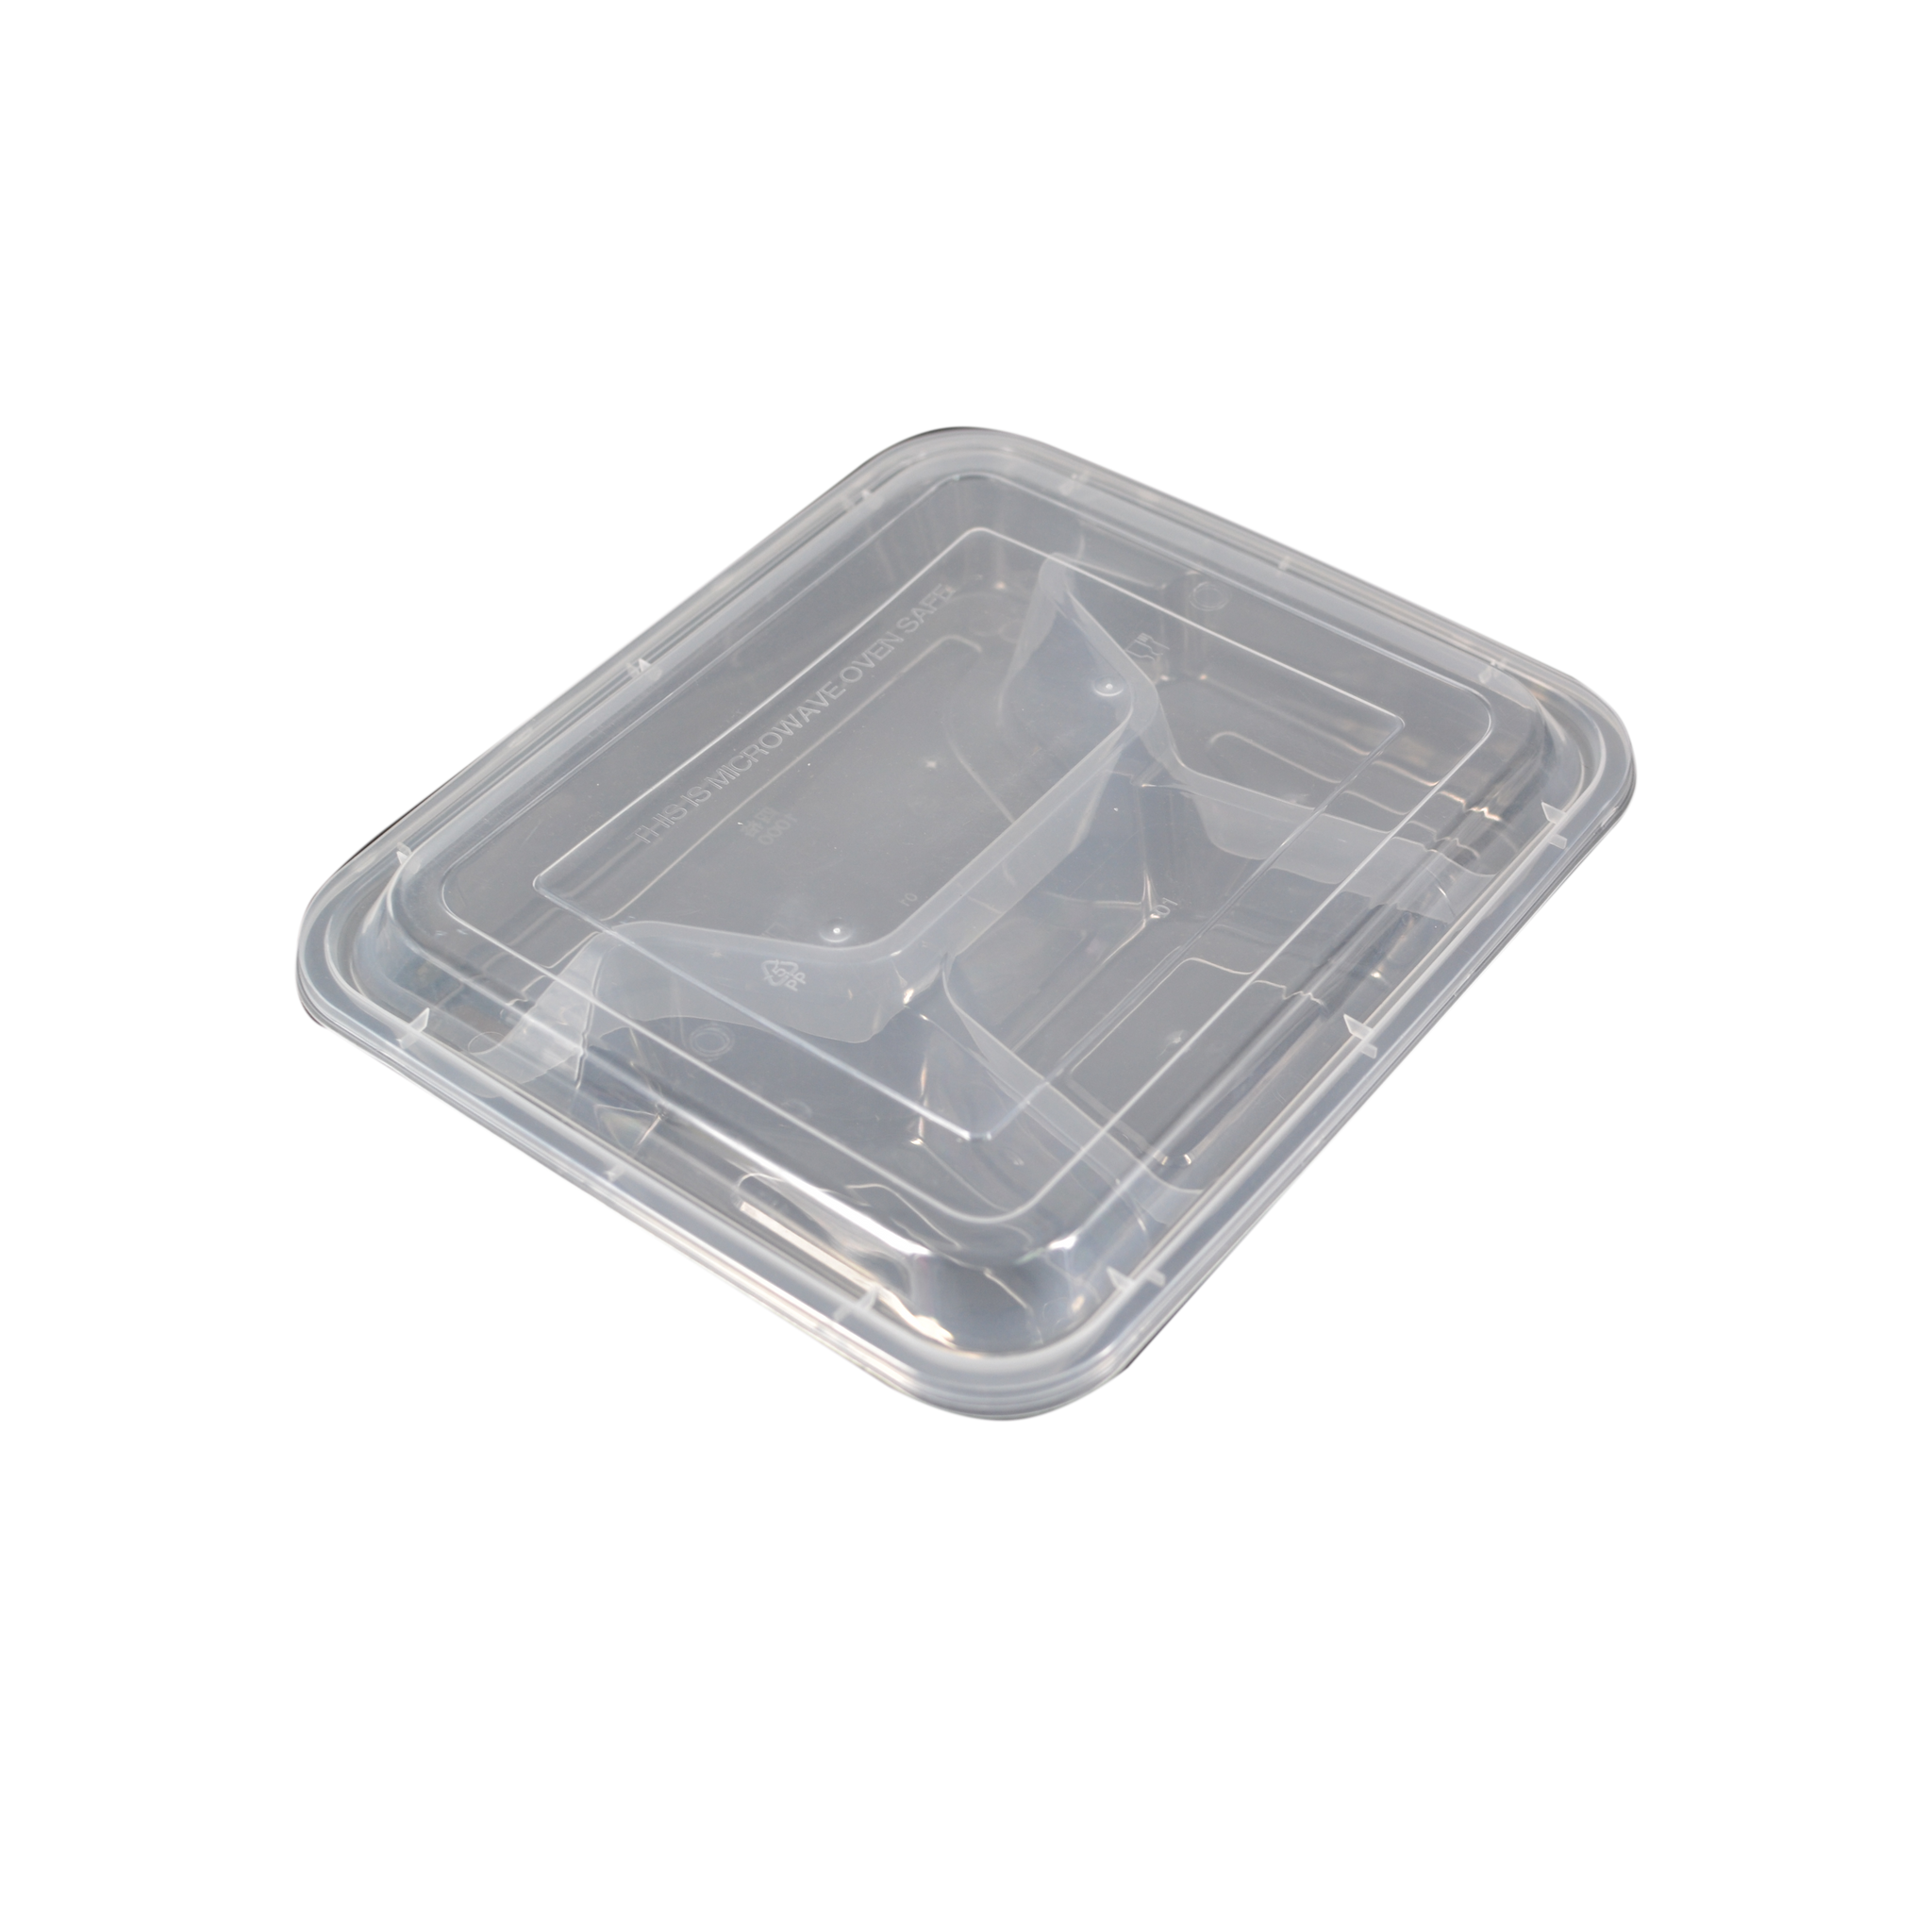 4 Division Clear Microwaveable Bento  Meal Box (Dome Lid)